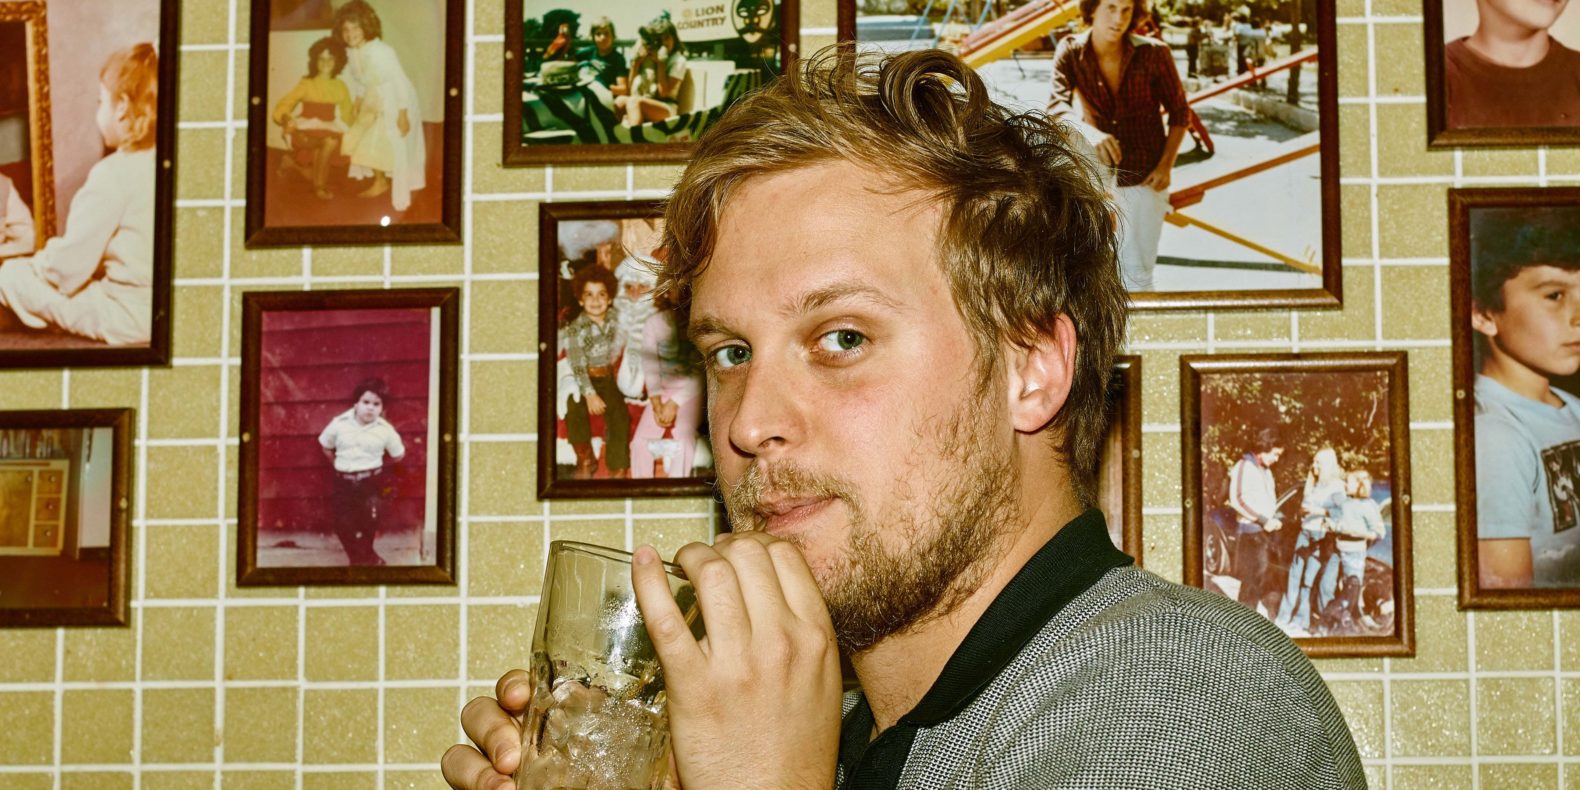 John Early sipping a drink